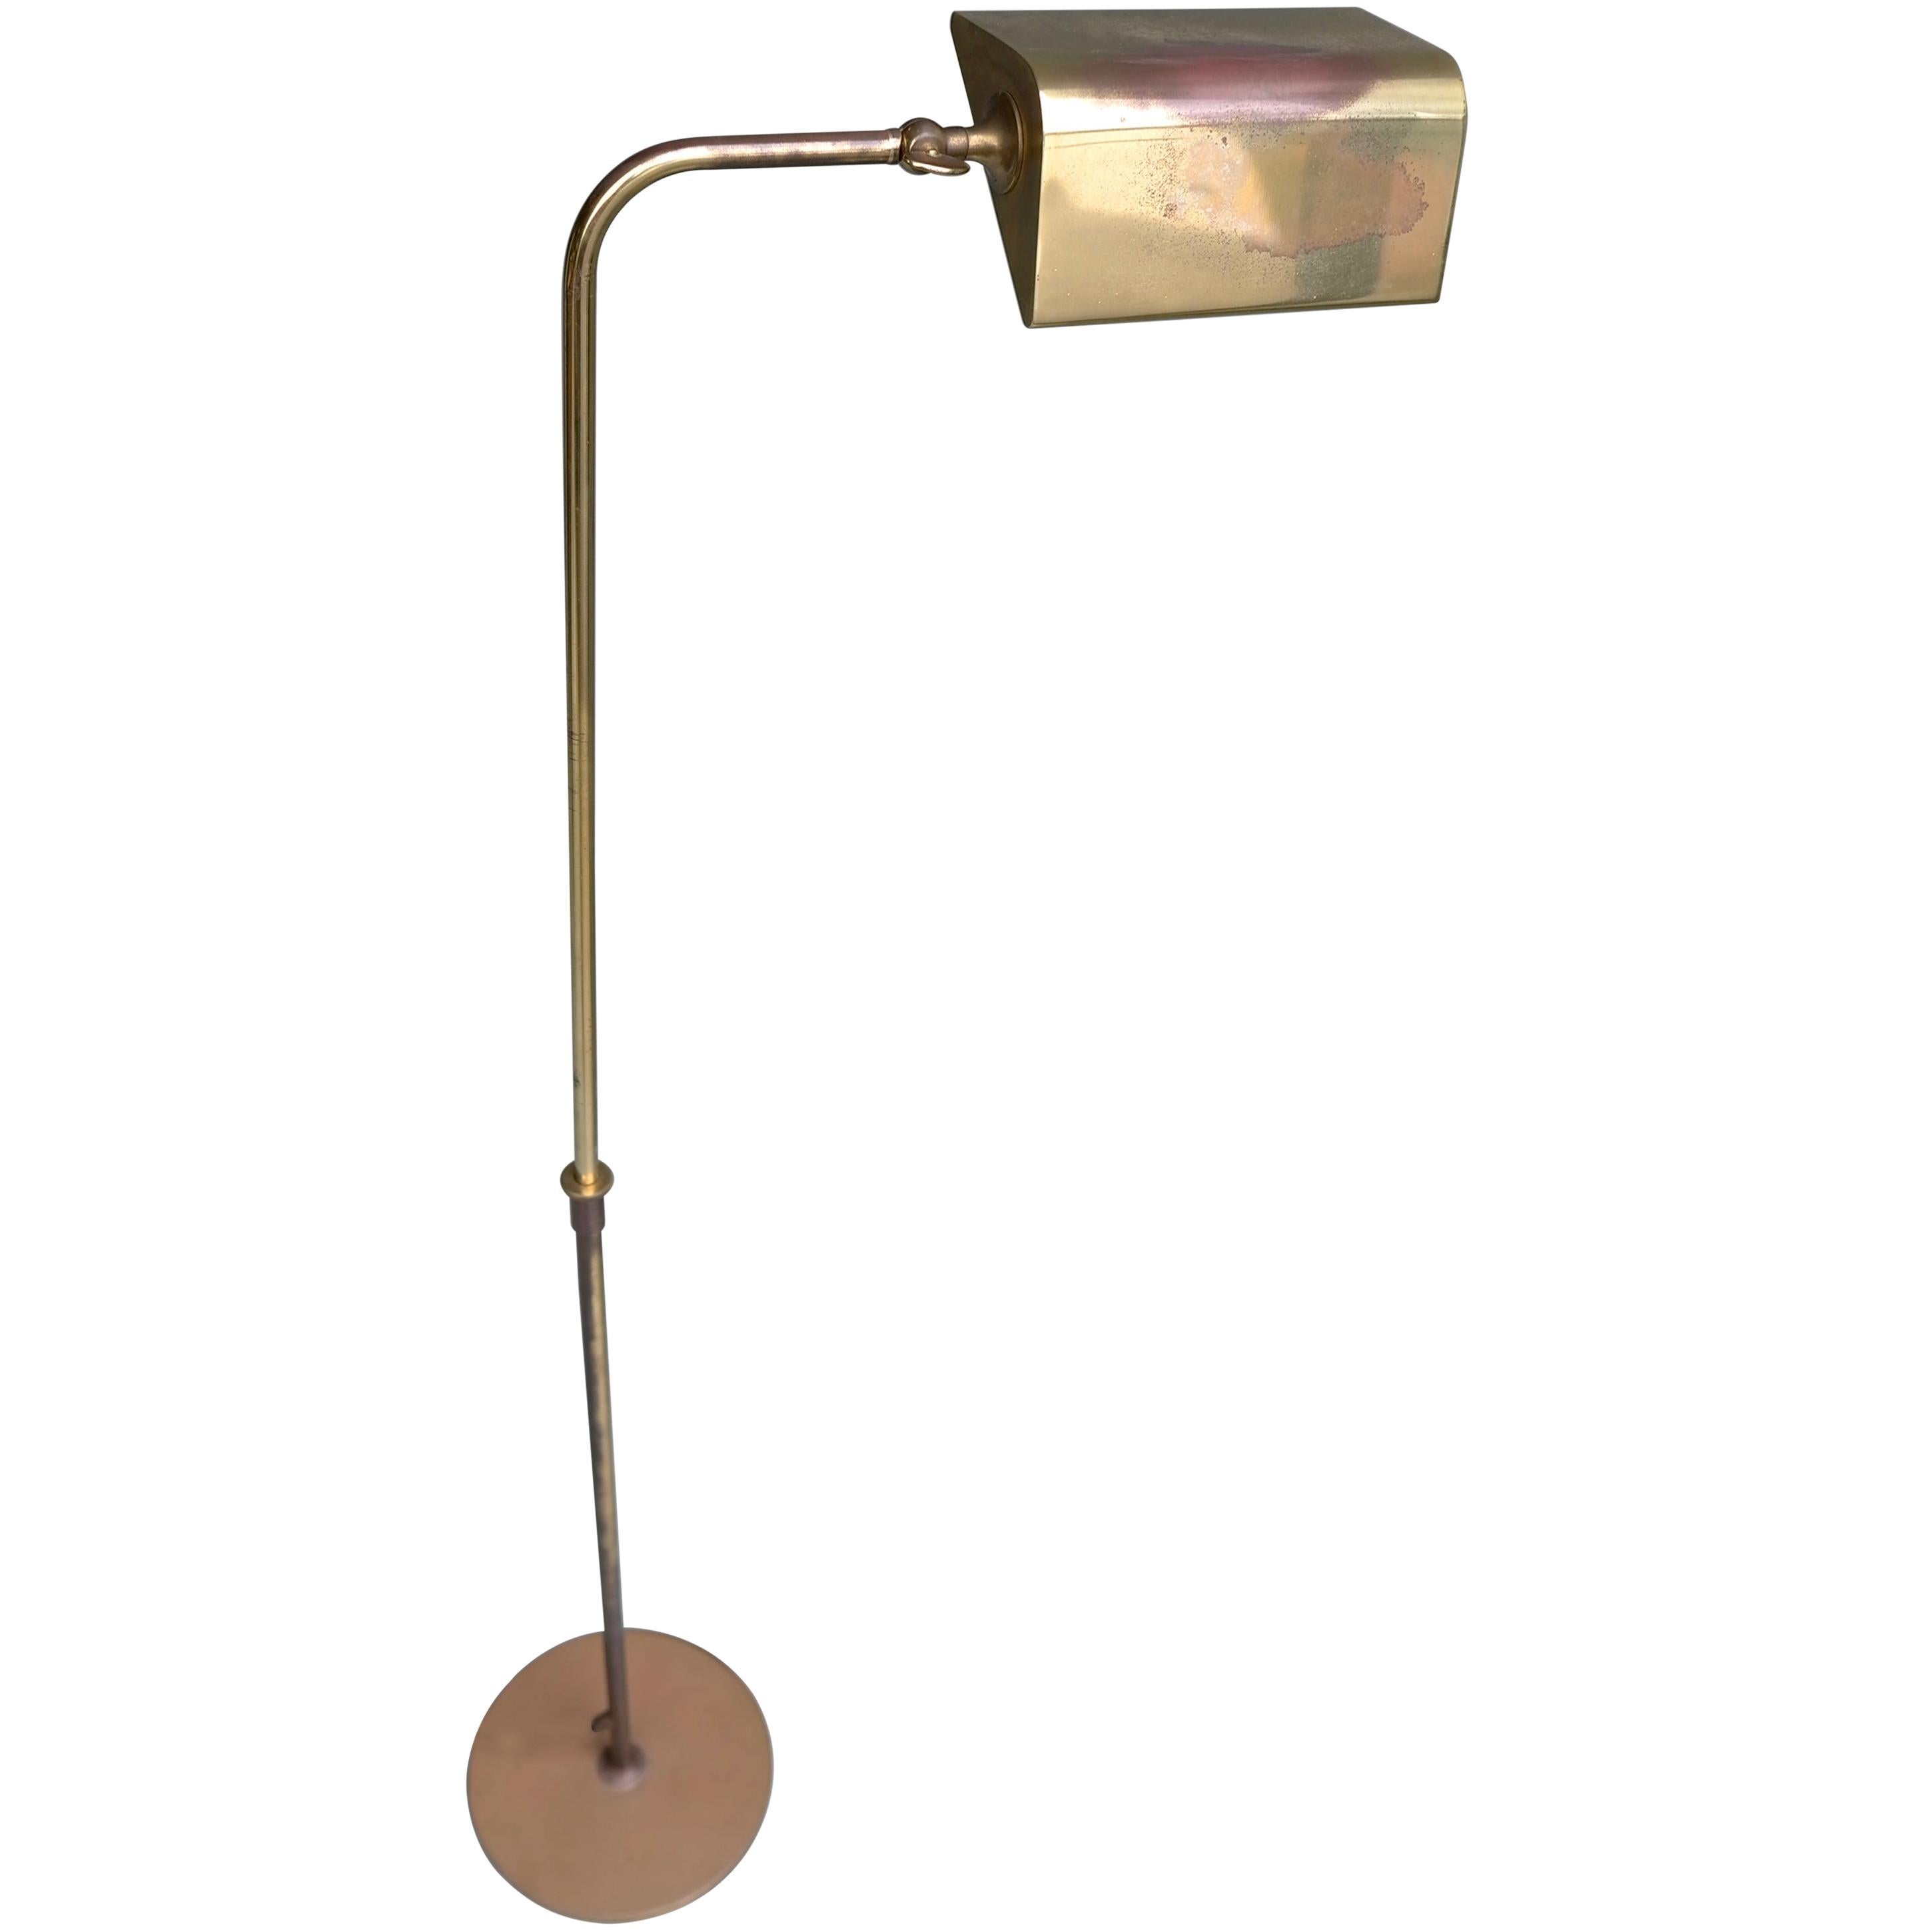 Florian Schulz Adjustable Copper and Brass Library Floor Lamp with Patina